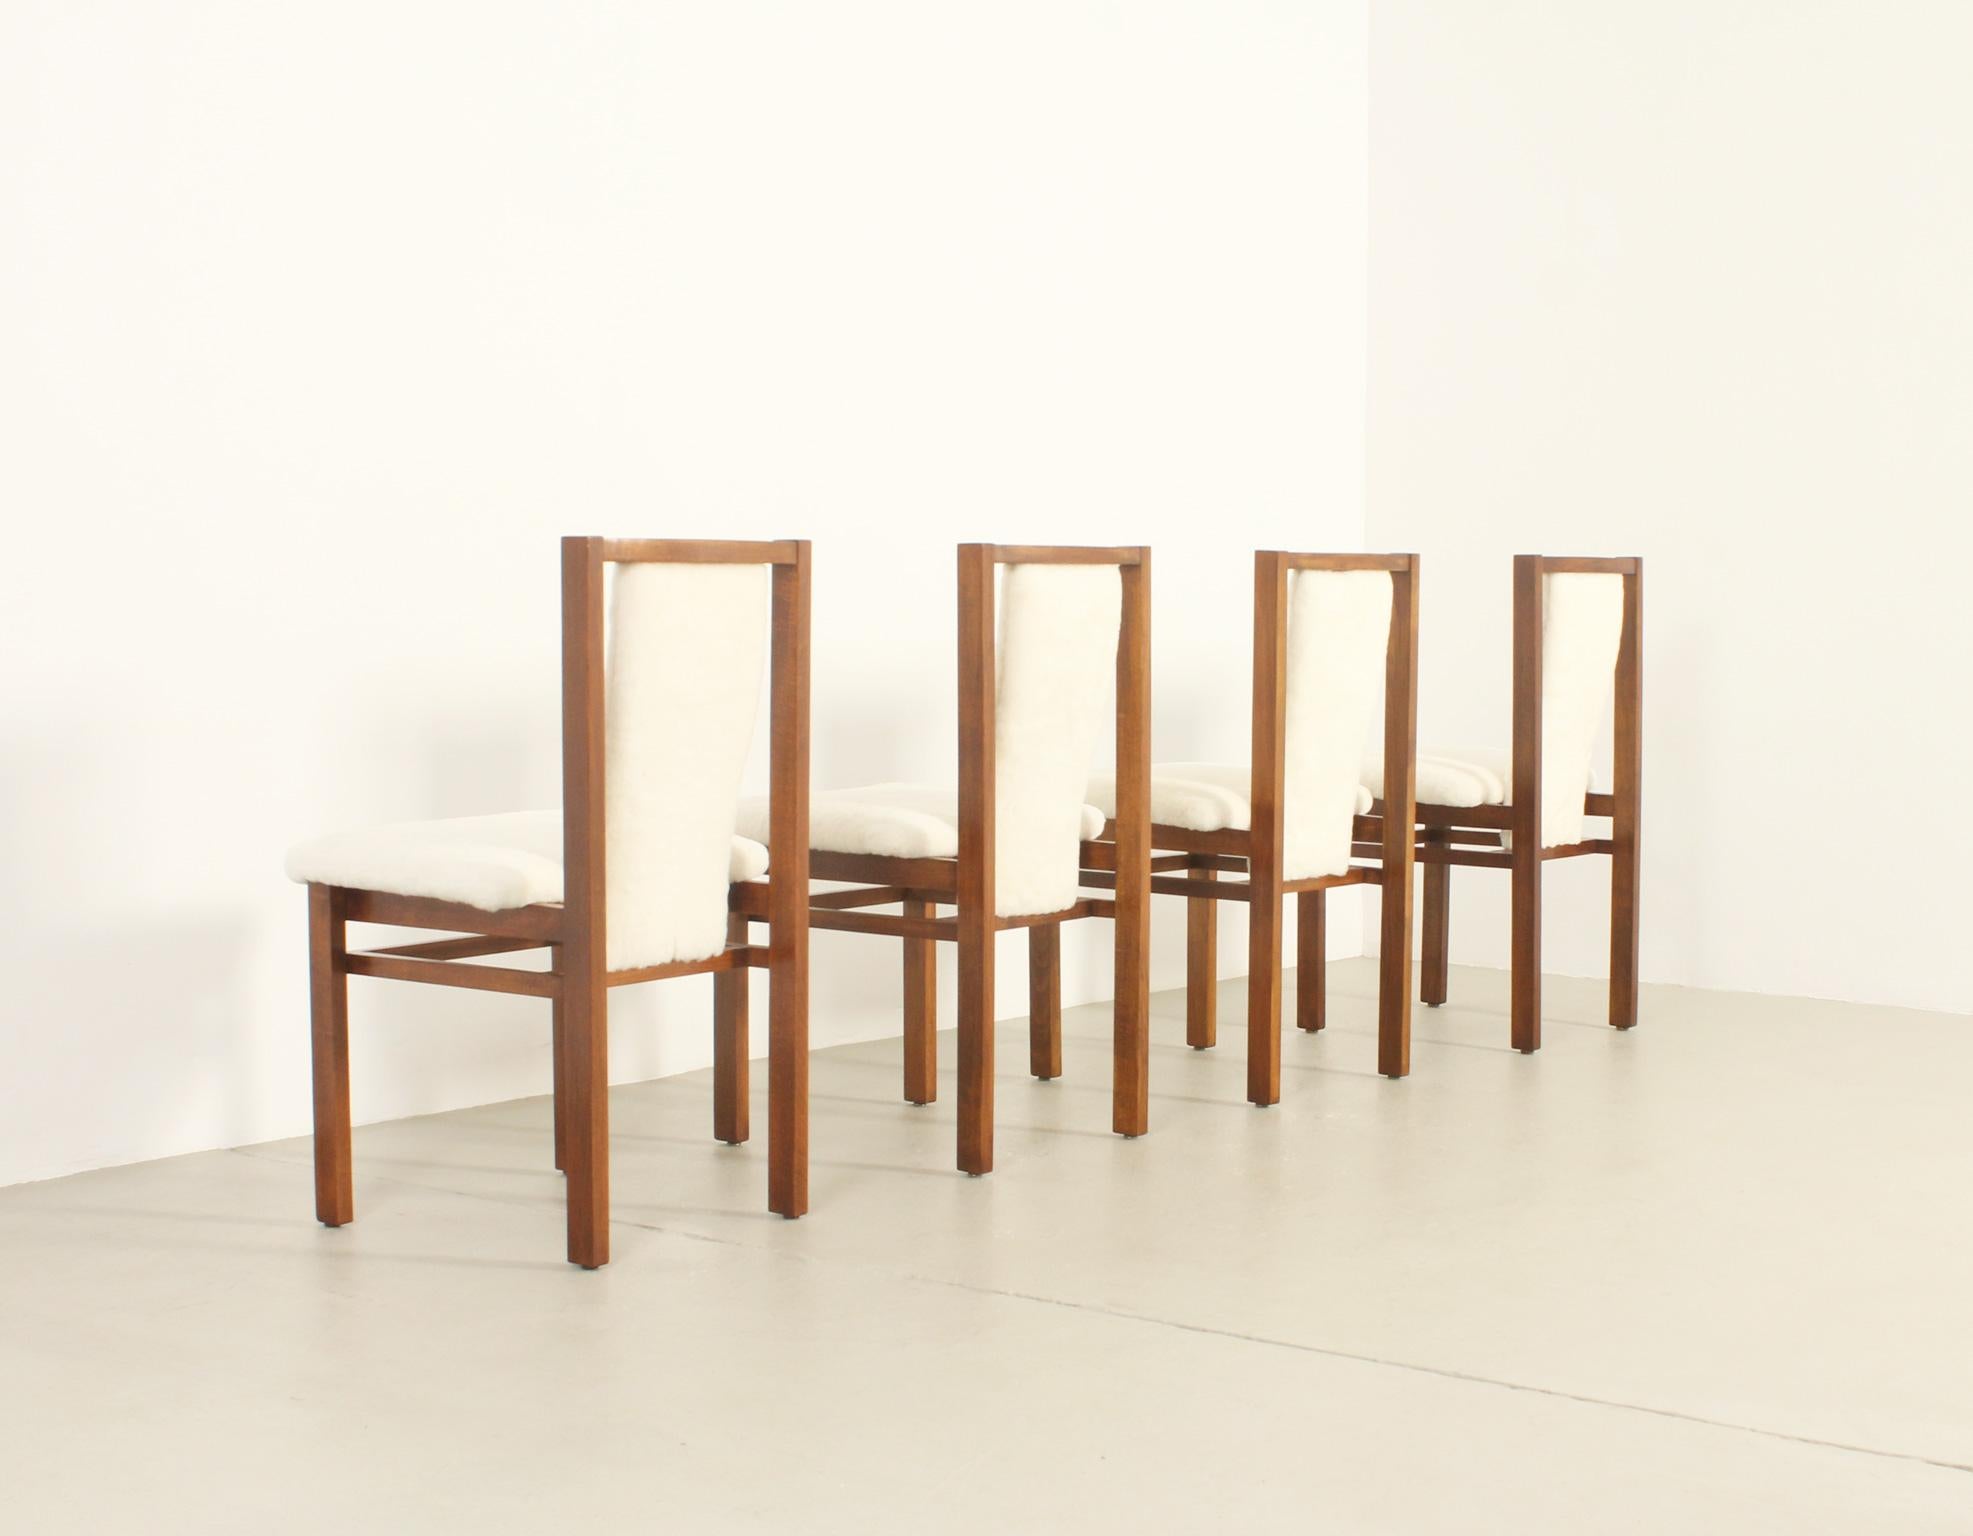 Four Dining Chairs by Jordi Vilanova in Oak Wood and Sheepskin, Spain, 1960's For Sale 8